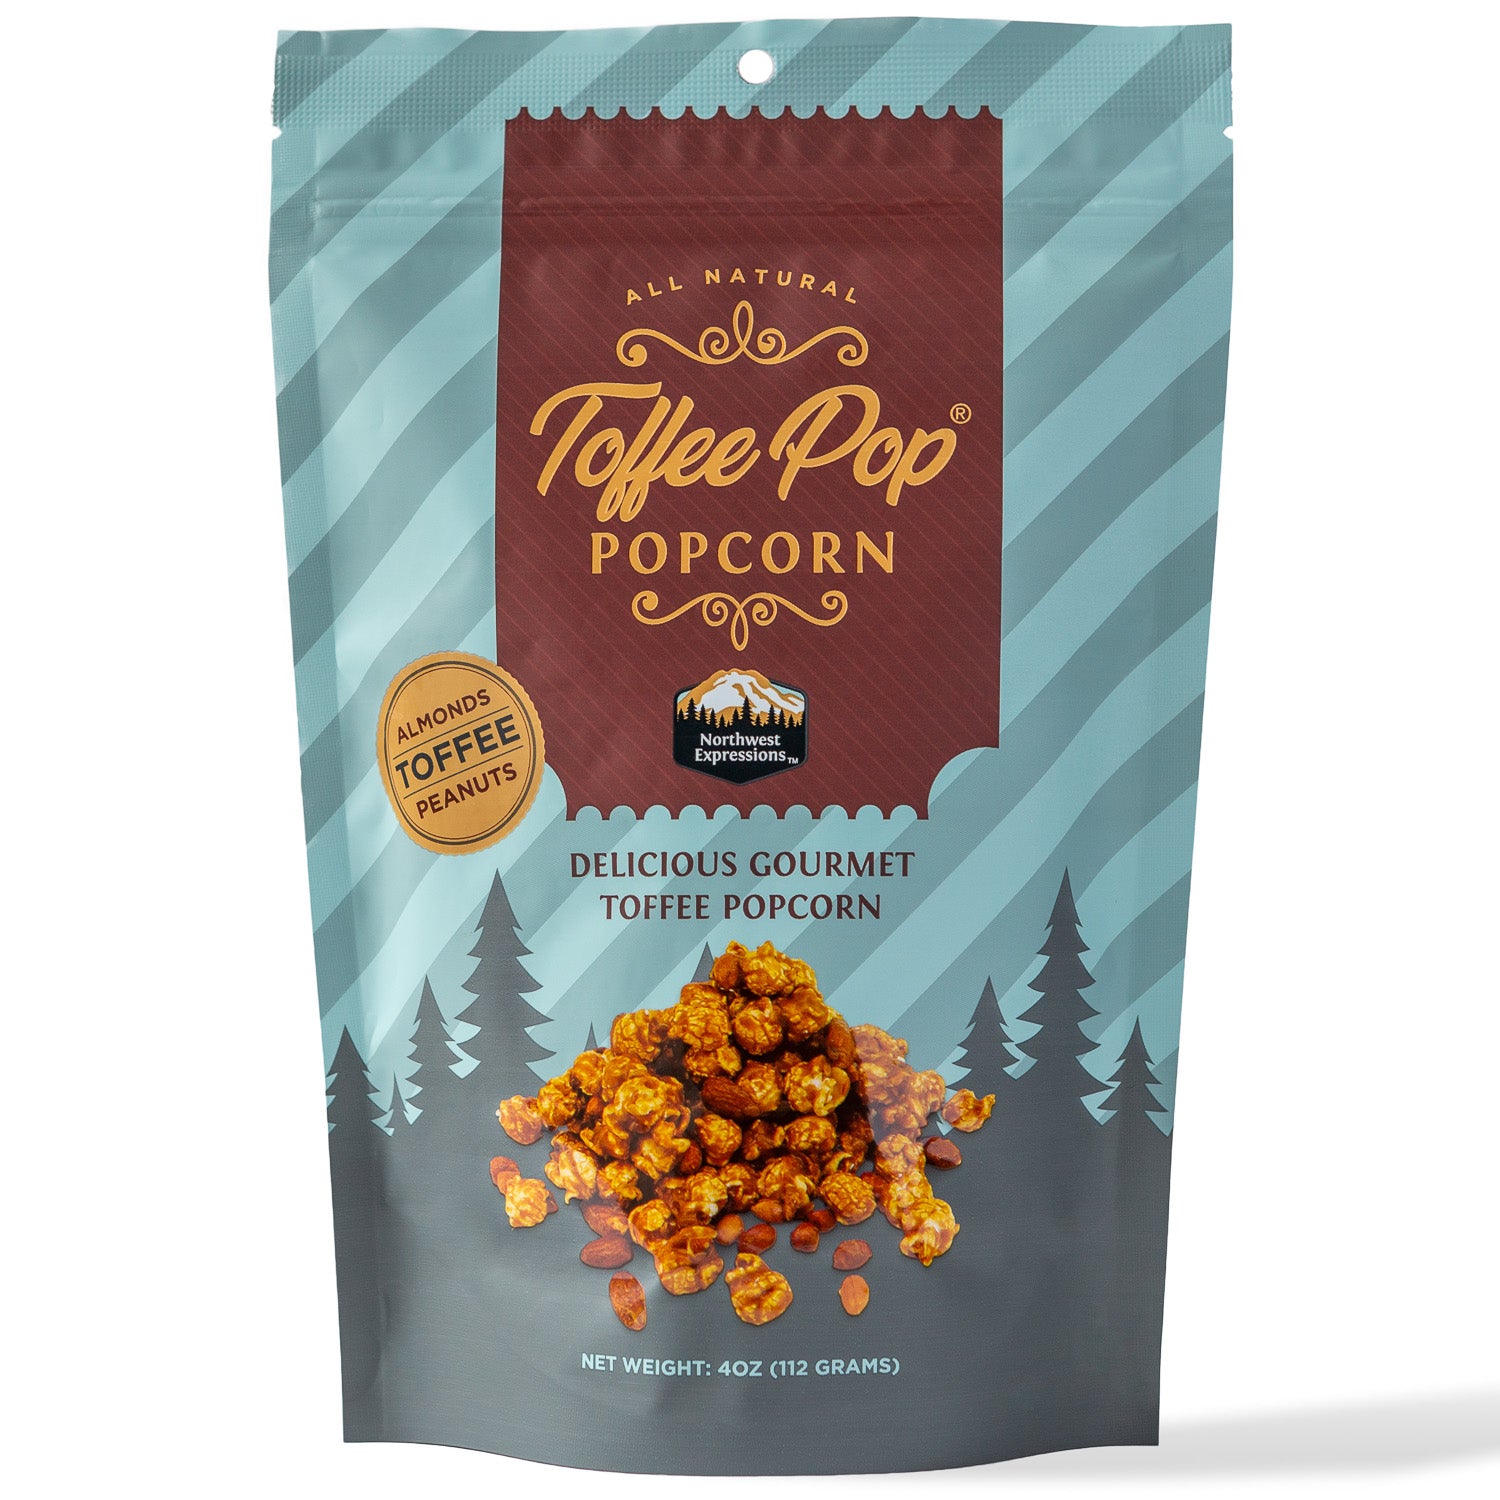 a 4 ounce pouch of northwest expressions toffee pop gourmet popcorn